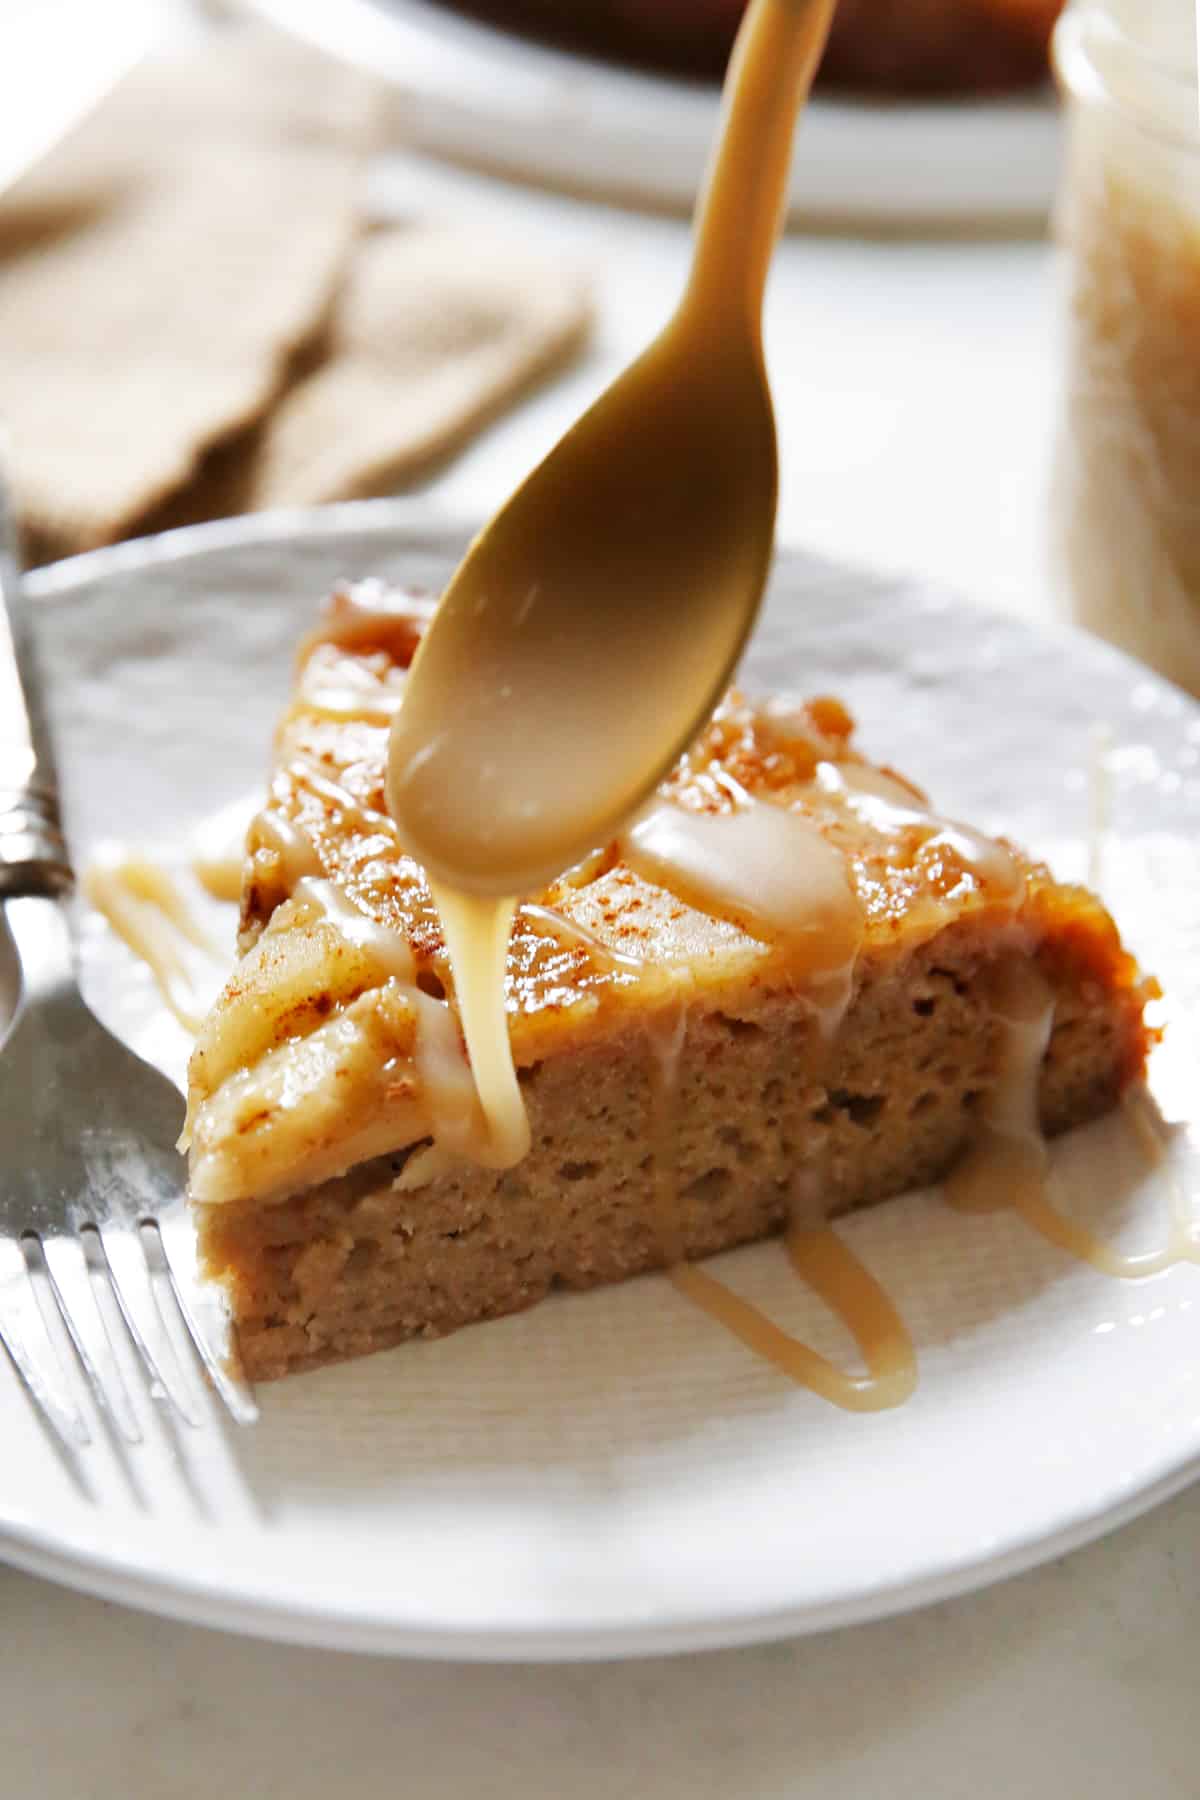 dairy free cake with caramel and apples